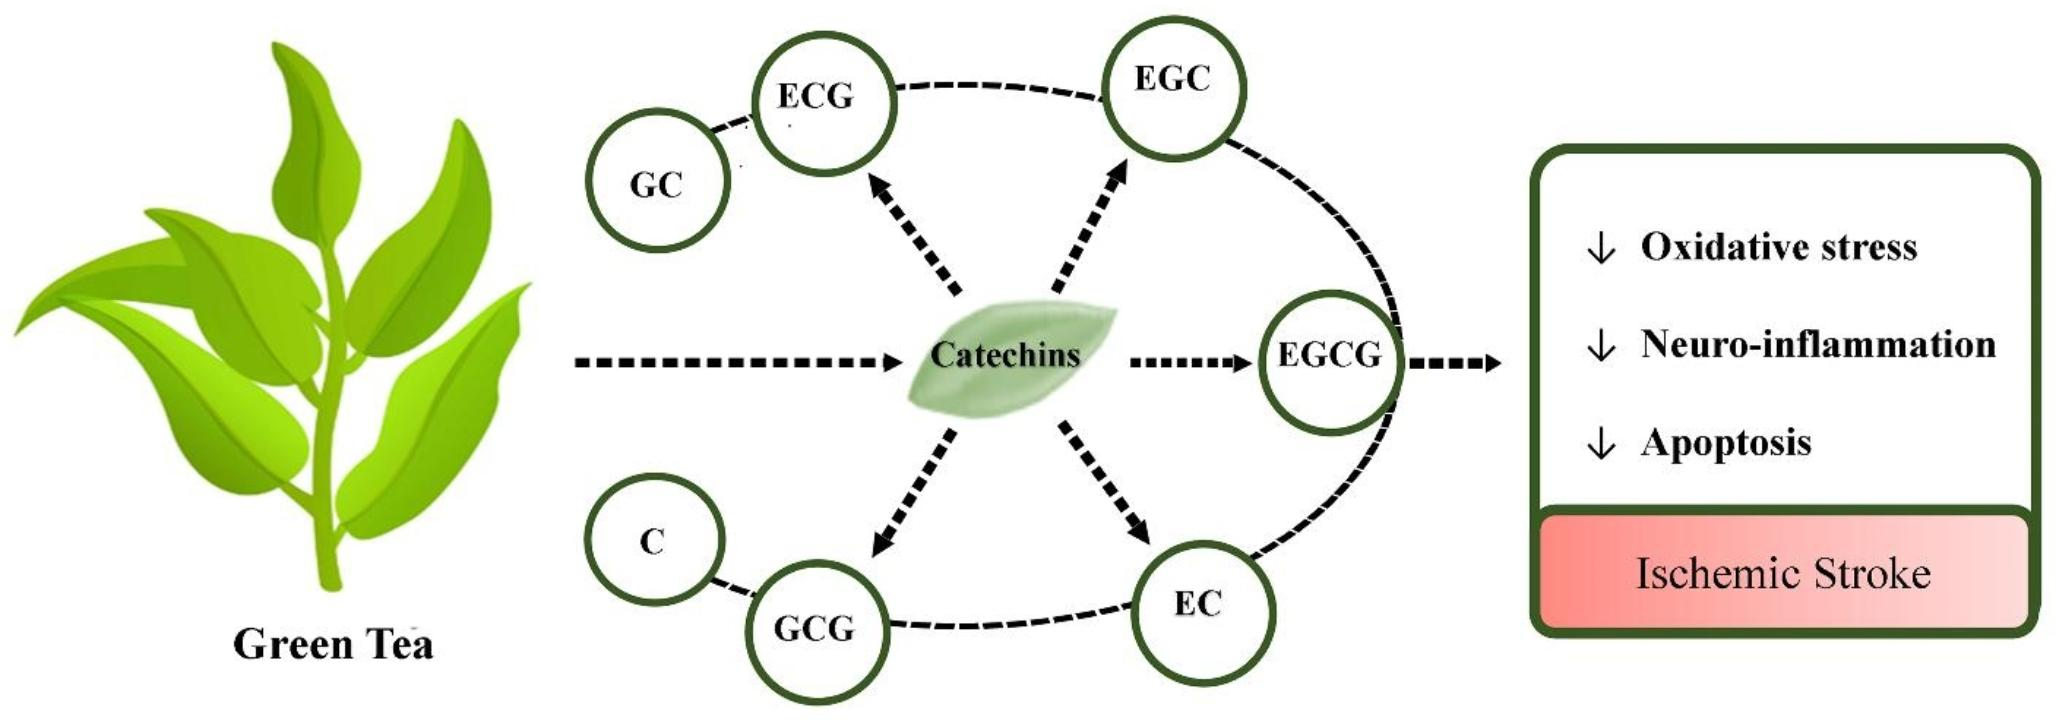 Therapeutic potentialities of green tea (Camellia sinensis) in ischemic stroke: biochemical and molecular evidence